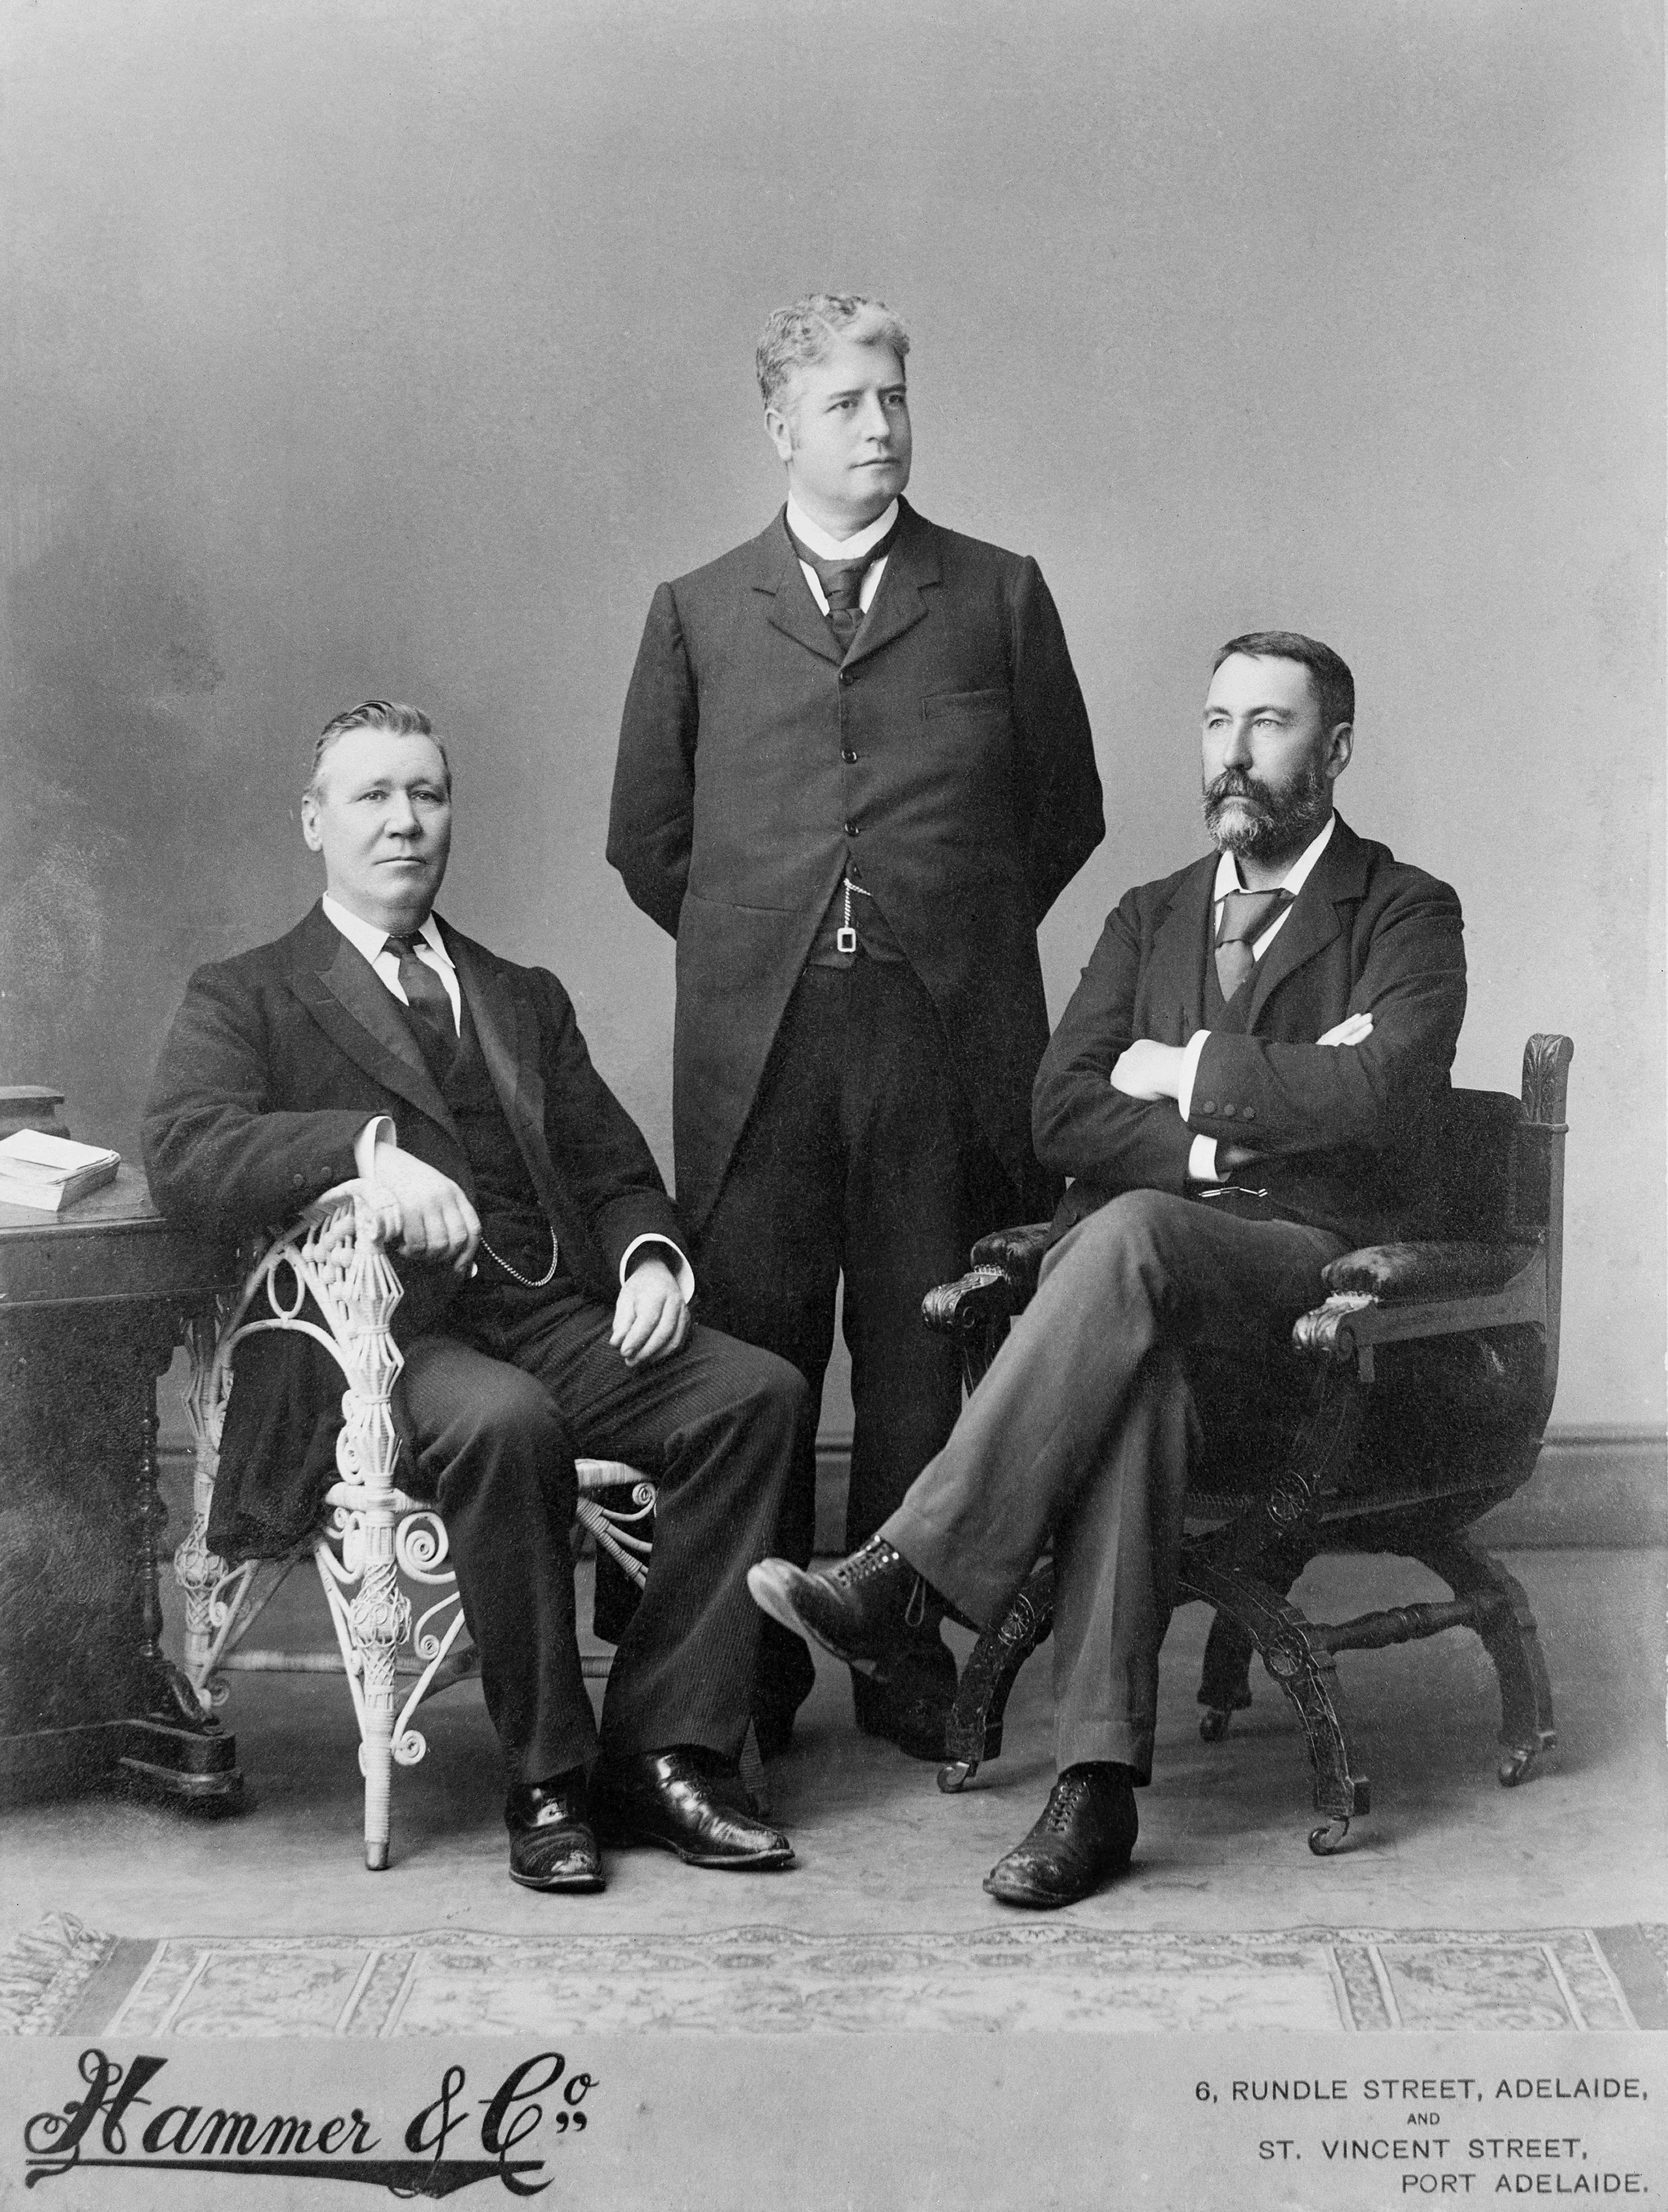 Black and white portrait of three well dressed men posing for a portrait.  